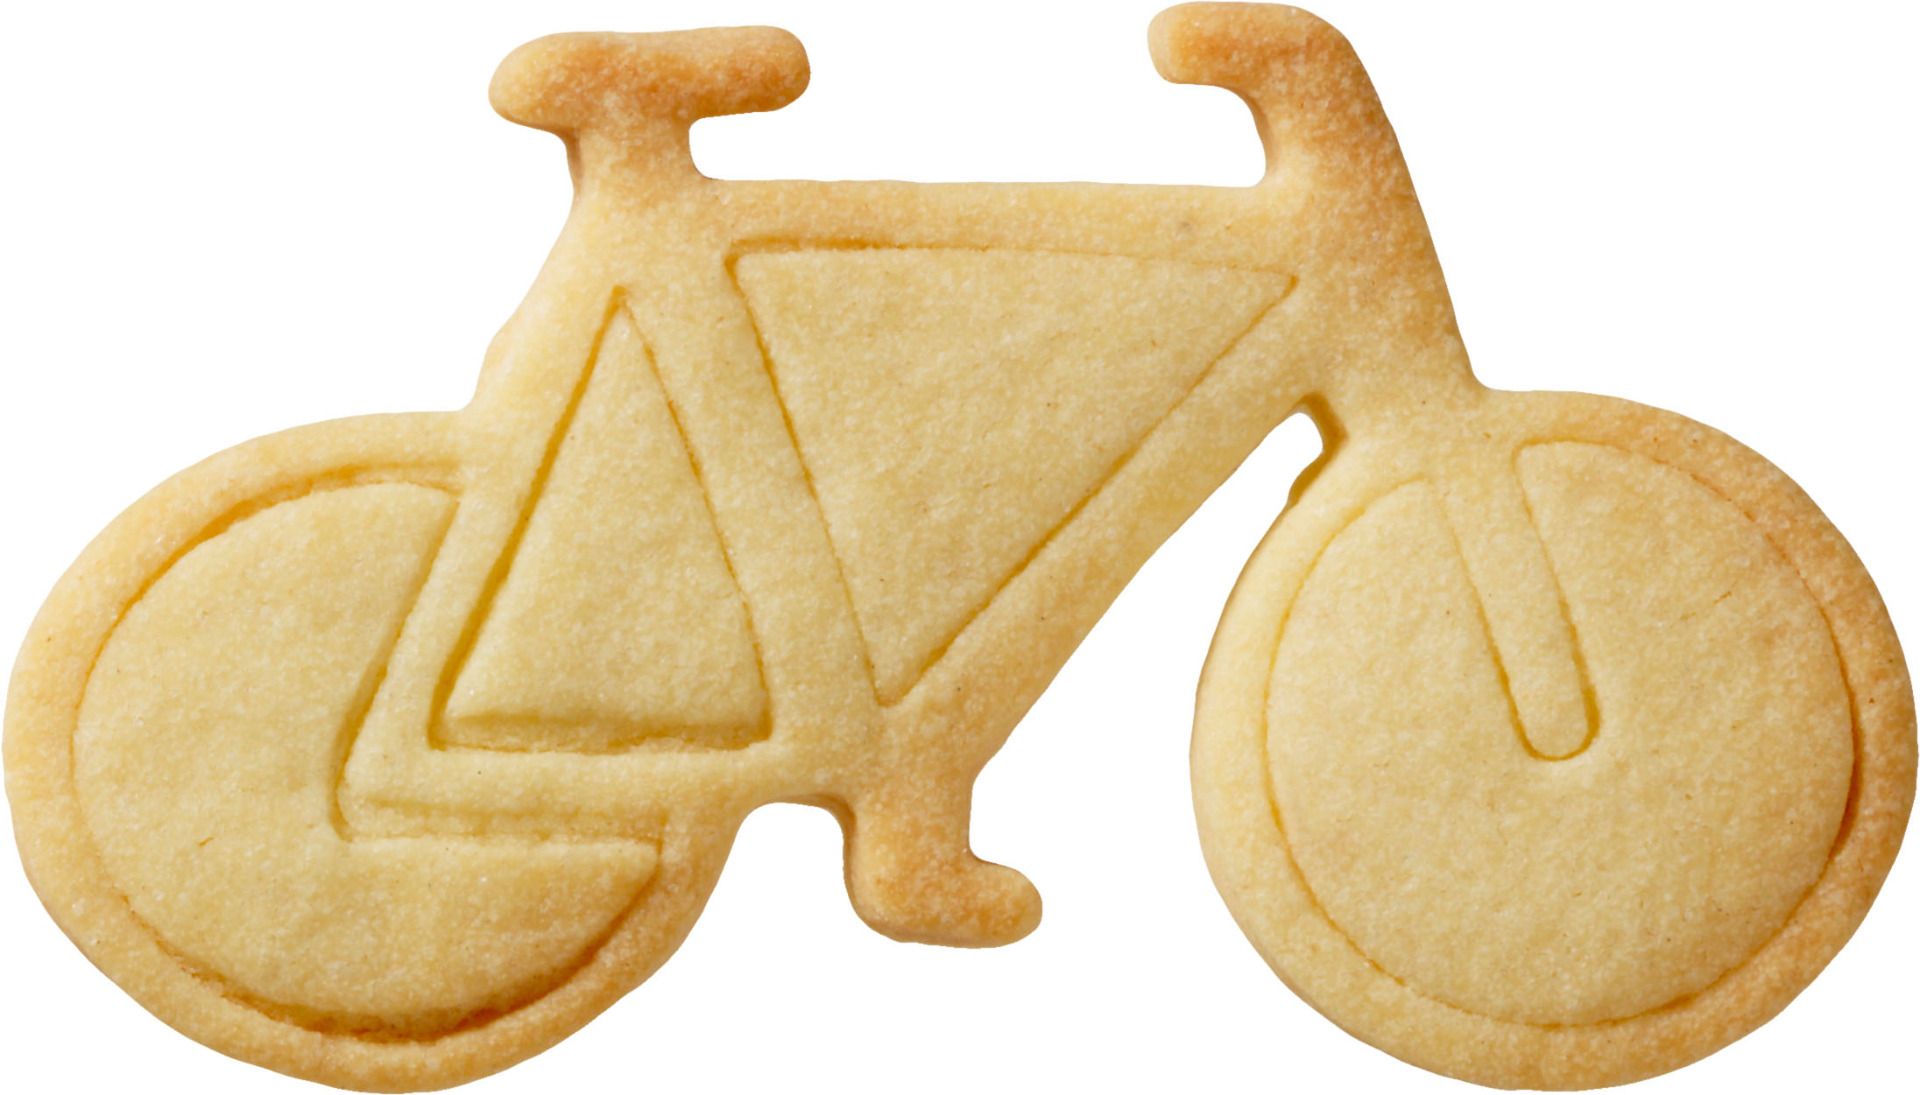 Cookie Cutter Bicycle